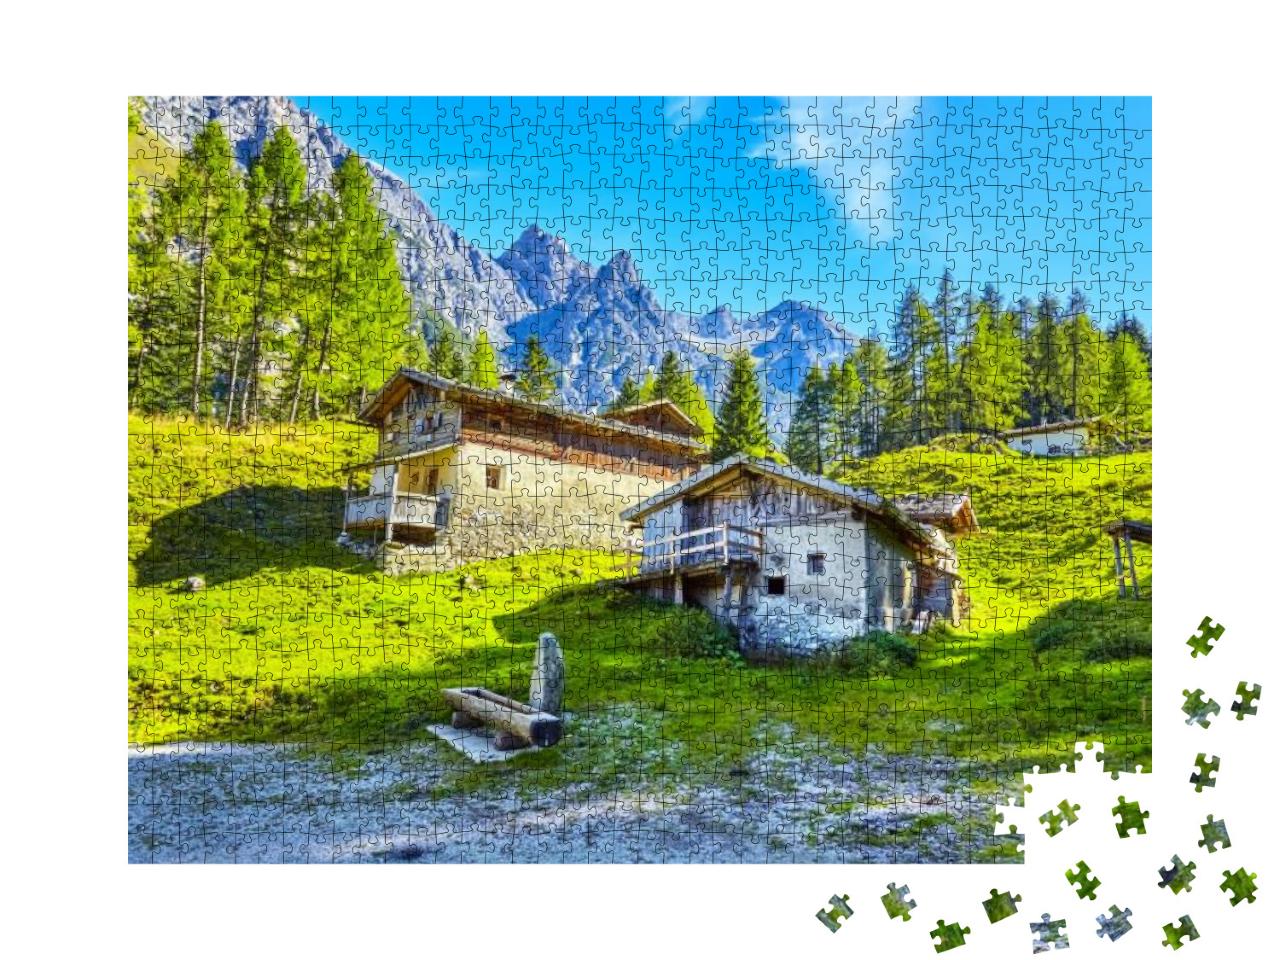 Beautiful Old Mountain Farm in the Stubaital, Tyrol, Aust... Jigsaw Puzzle with 1000 pieces